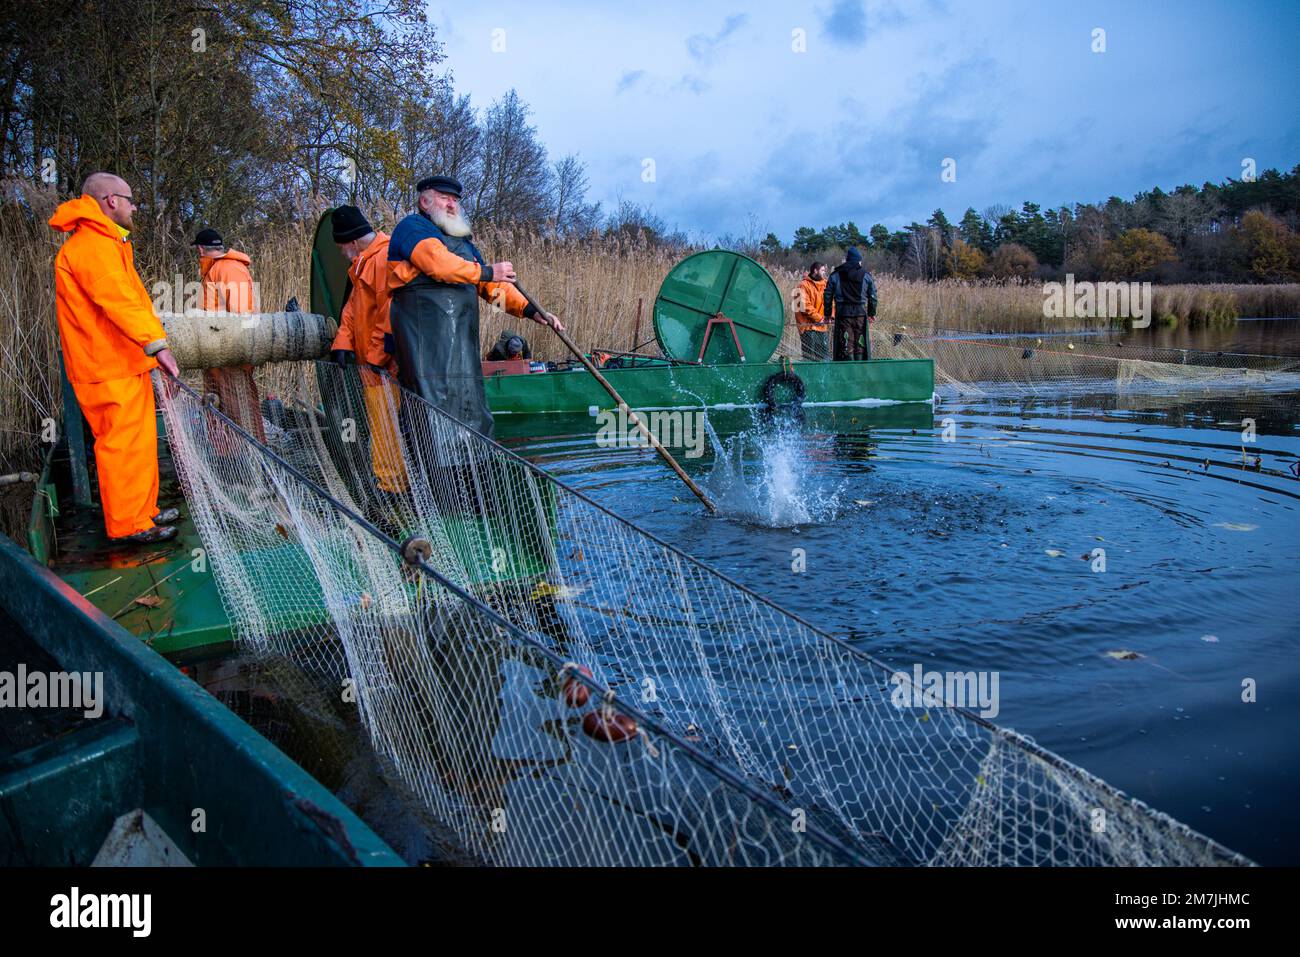 https://c8.alamy.com/comp/2M7JHMC/19-november-2022-mecklenburg-western-pomerania-alt-schlagsdorf-fisherman-walter-piehl-center-and-his-helpers-take-the-hauling-net-out-of-the-water-of-lake-neuschlagsdorf-three-weeks-after-the-start-of-the-carp-season-however-the-christmas-carp-are-not-yet-going-into-the-net-in-mecklenburg-only-grass-carp-and-pike-are-wriggling-in-the-fishing-gear-piehl-a-65-year-old-former-deep-sea-fisherman-is-one-of-the-very-few-fishermen-in-mecklenburg-vorpommern-who-catch-carp-in-natural-lakes-using-towed-nets-photo-jens-bttnerdpa-2M7JHMC.jpg